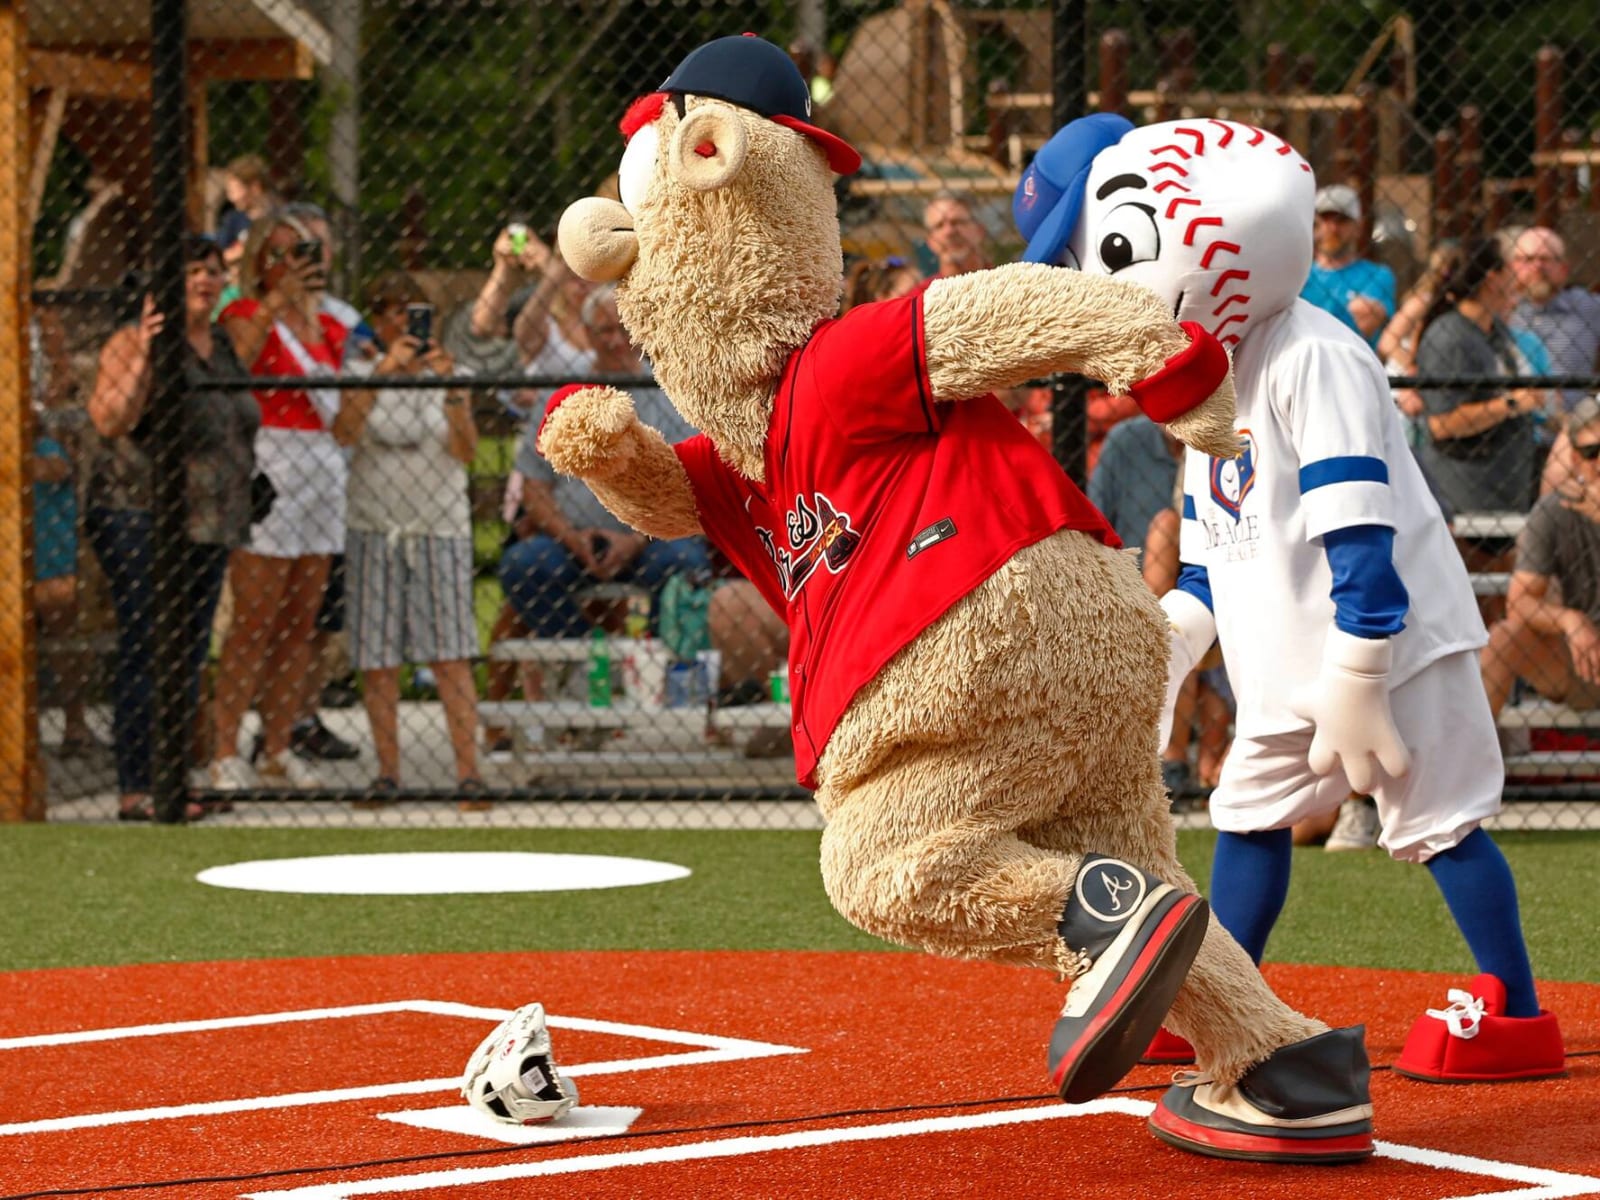 Braves mascot gets HOF attention with gridiron domination